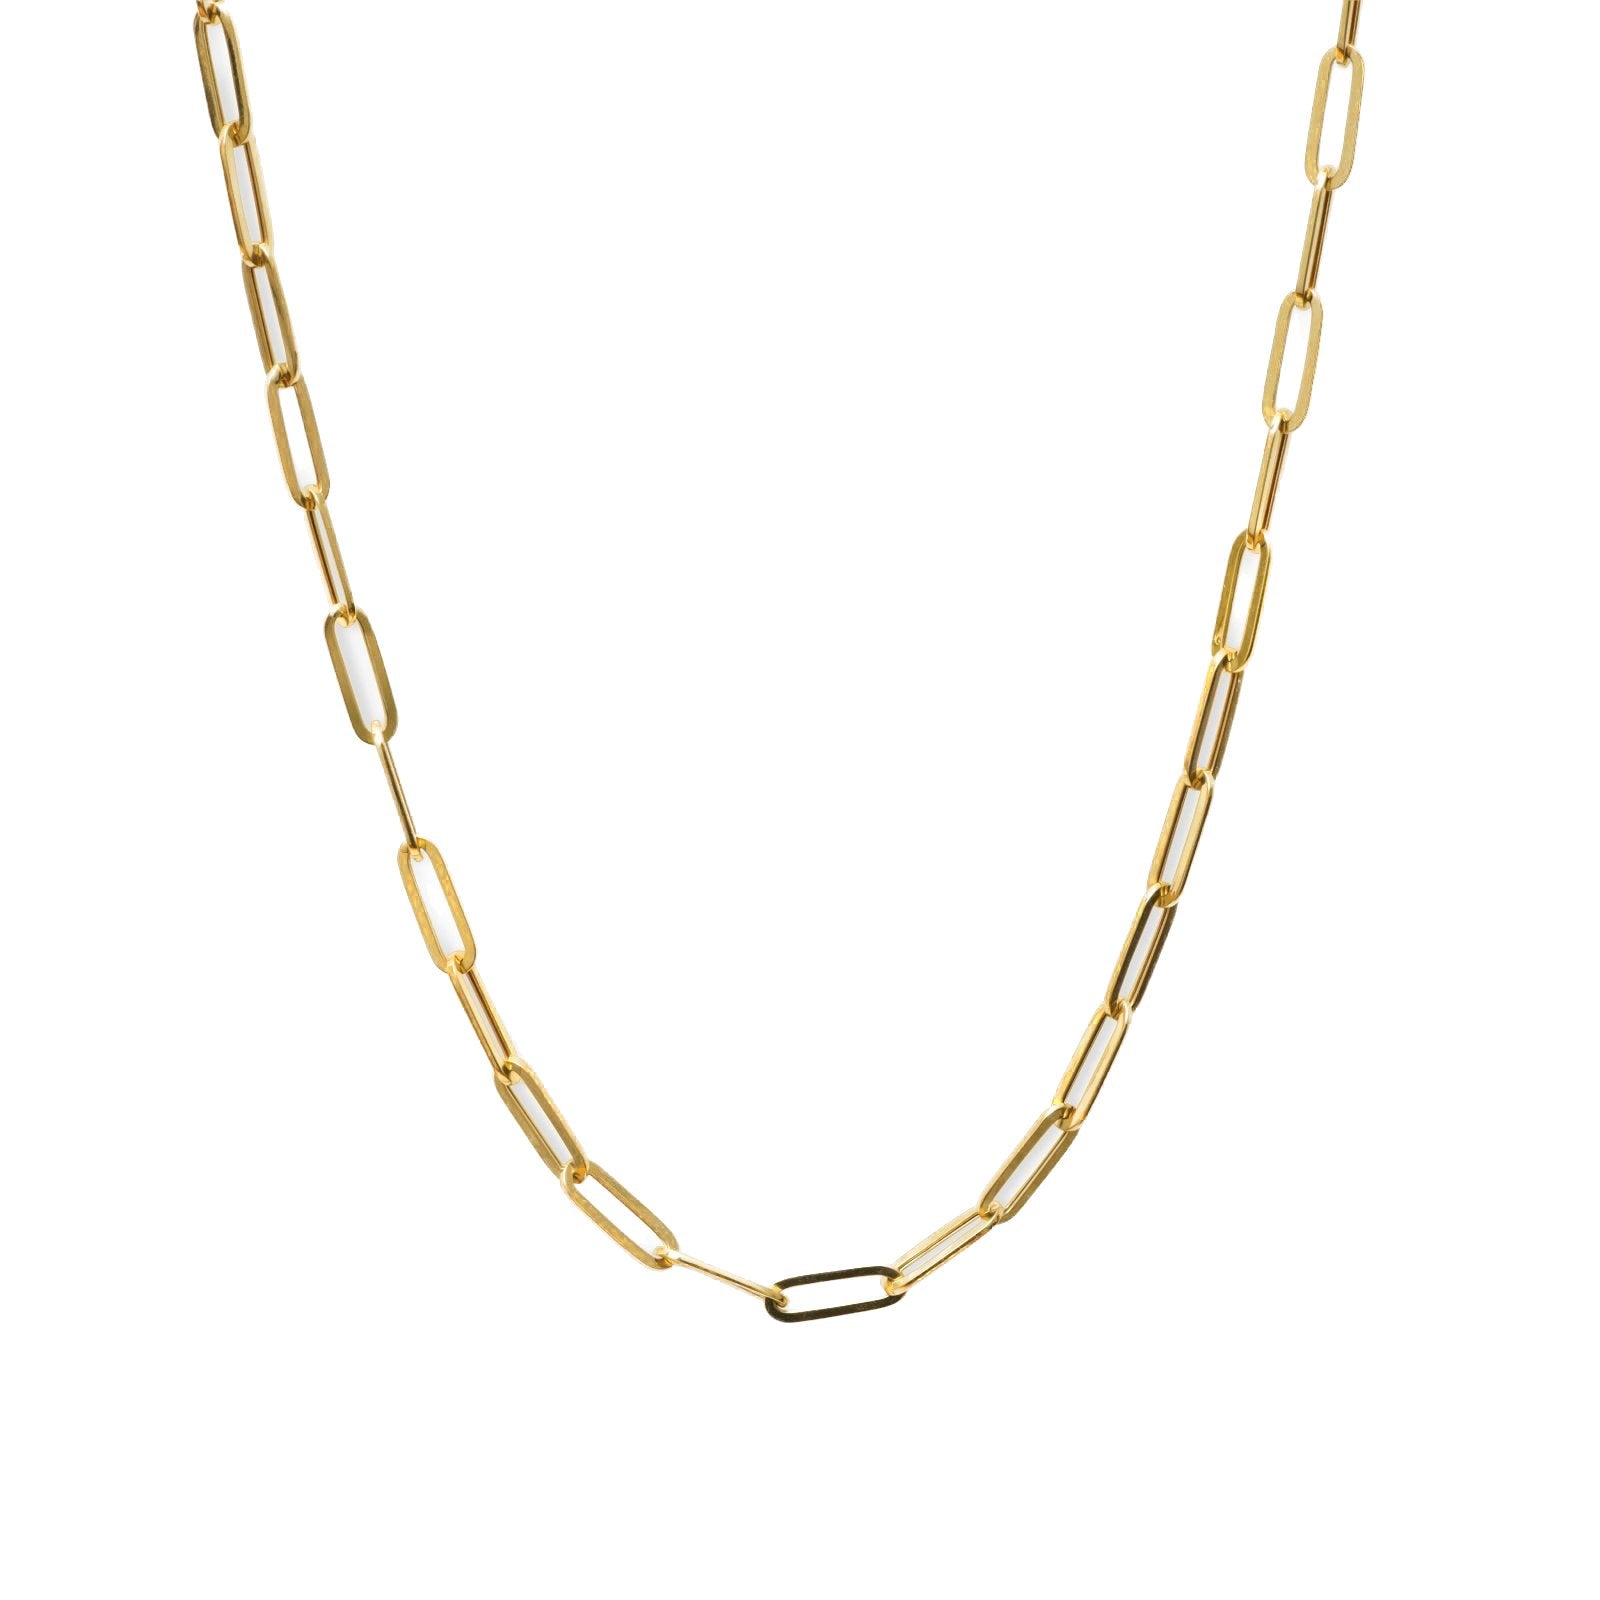 Classic Paperclip Chain Necklace Necklaces Estella Collection #product_description# 18190 14k Chain Made to Order #tag4# #tag5# #tag6# #tag7# #tag8# #tag9# #tag10# 18 Inches (4.2 mm) 14K Yellow Gold